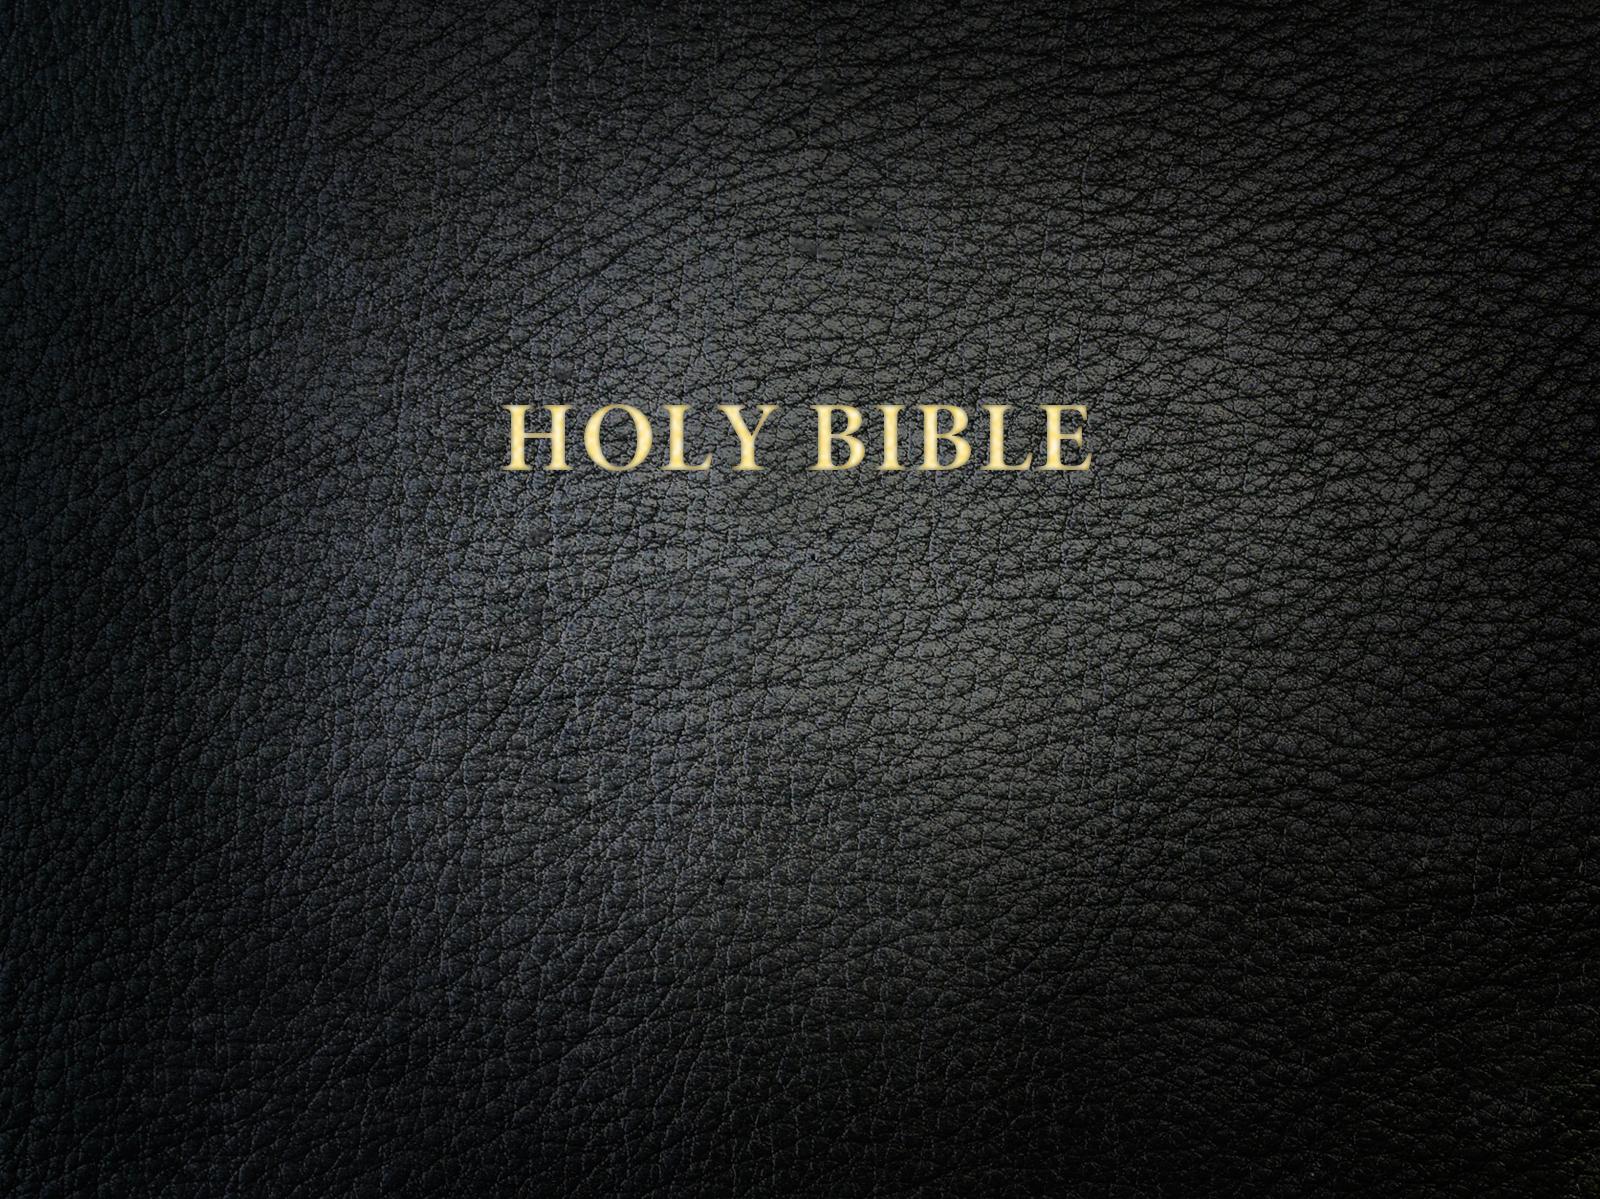 Free download The Holy Bible Cover Holy bible ending image